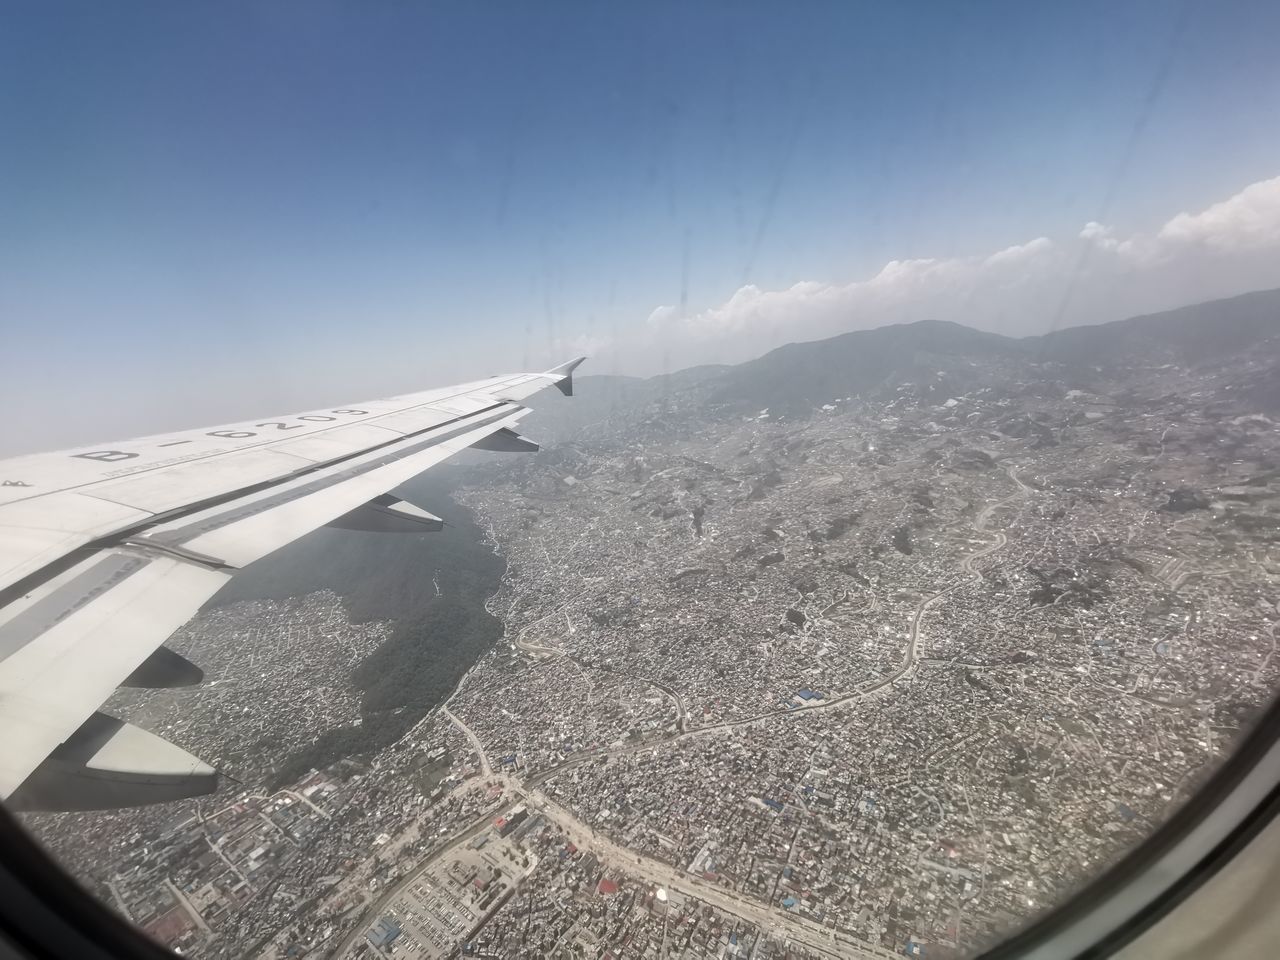 AERIAL VIEW OF MOUNTAINS AND AIRPLANE